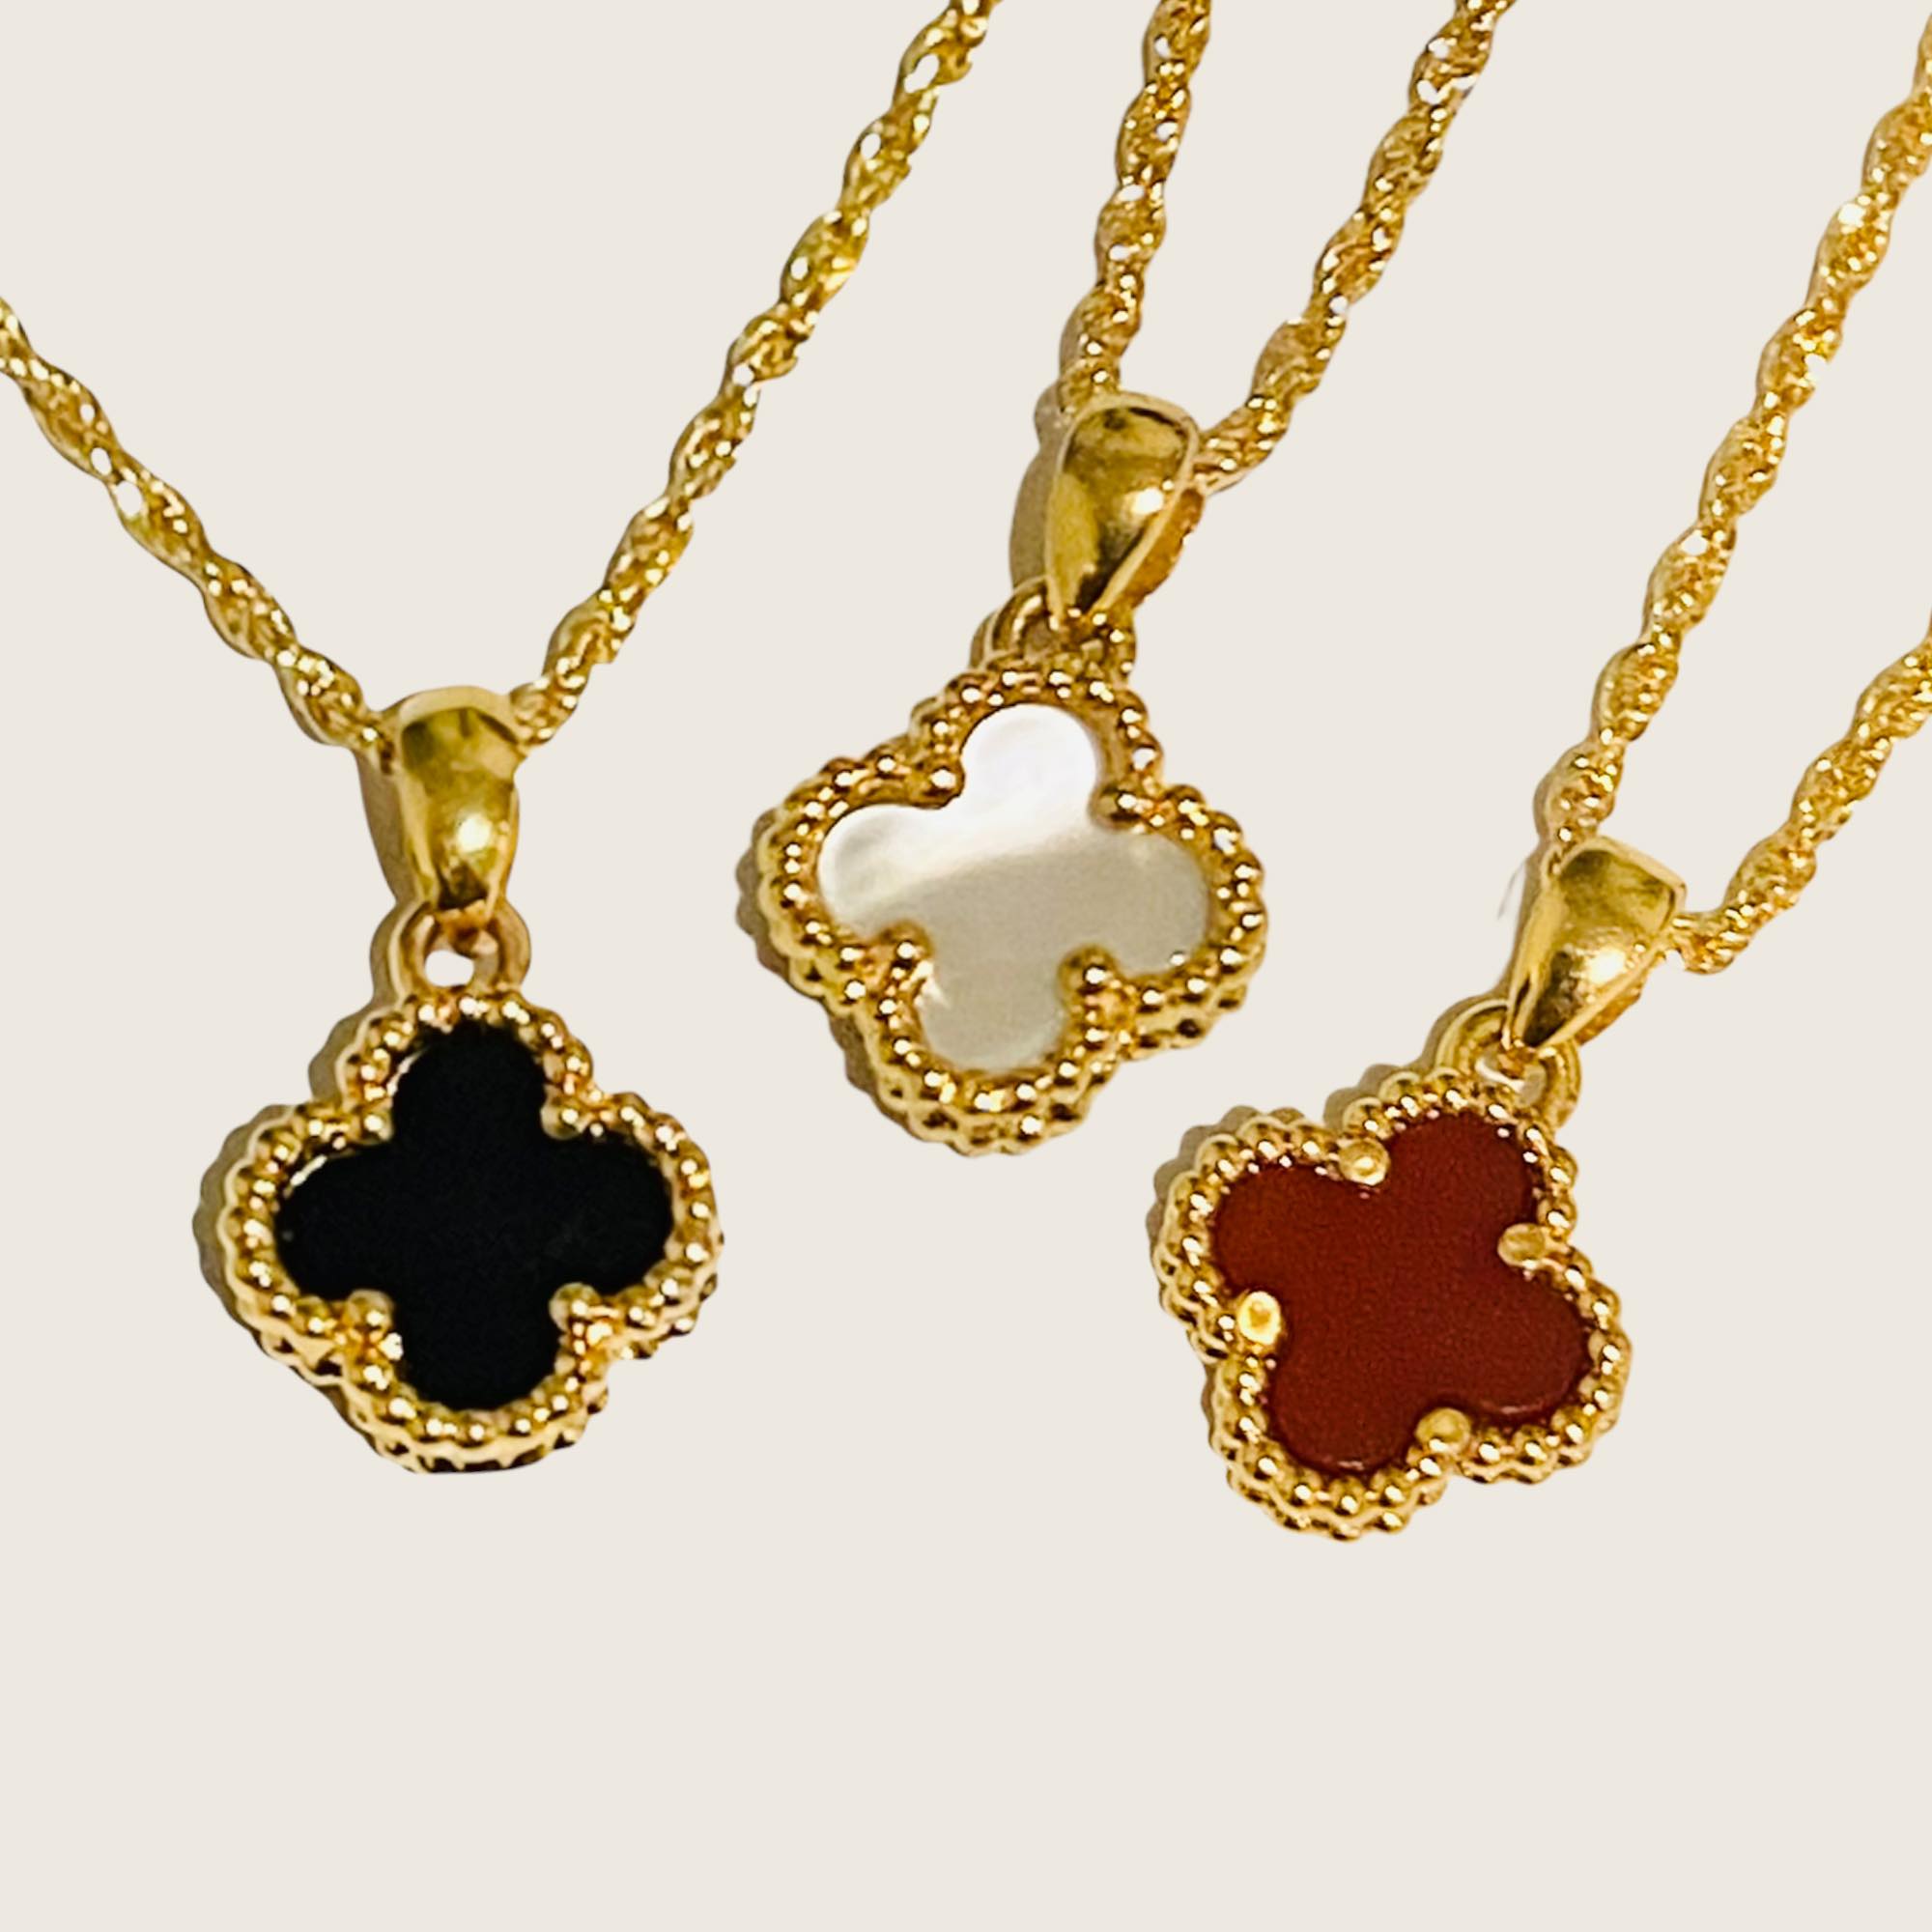 Rahnee Gold Clover Necklace - Arms Of Eve